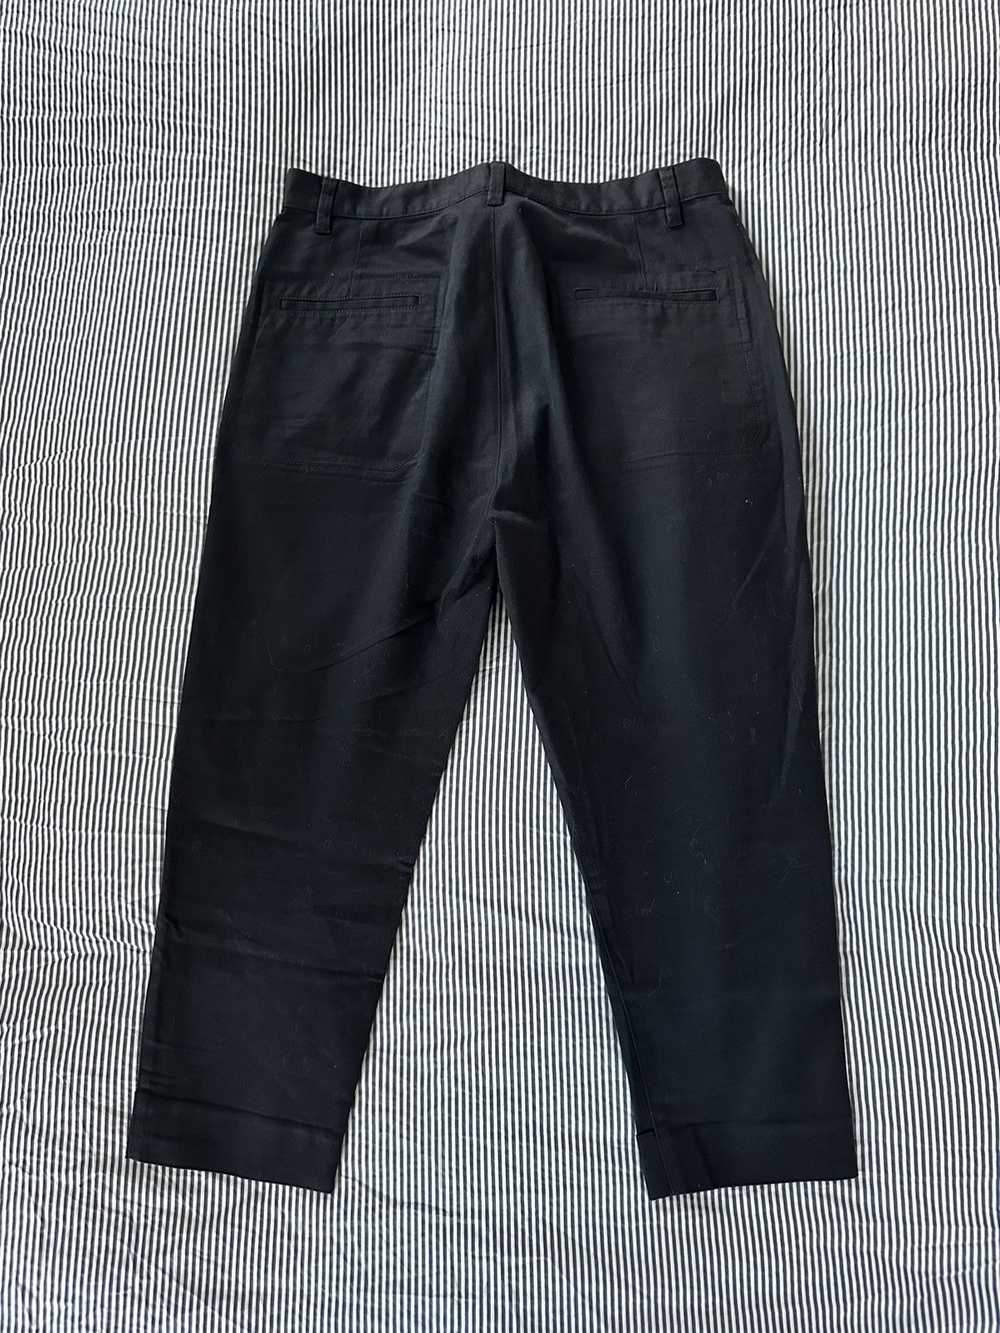 Helmut Lang Black Cropped Trousers - image 3